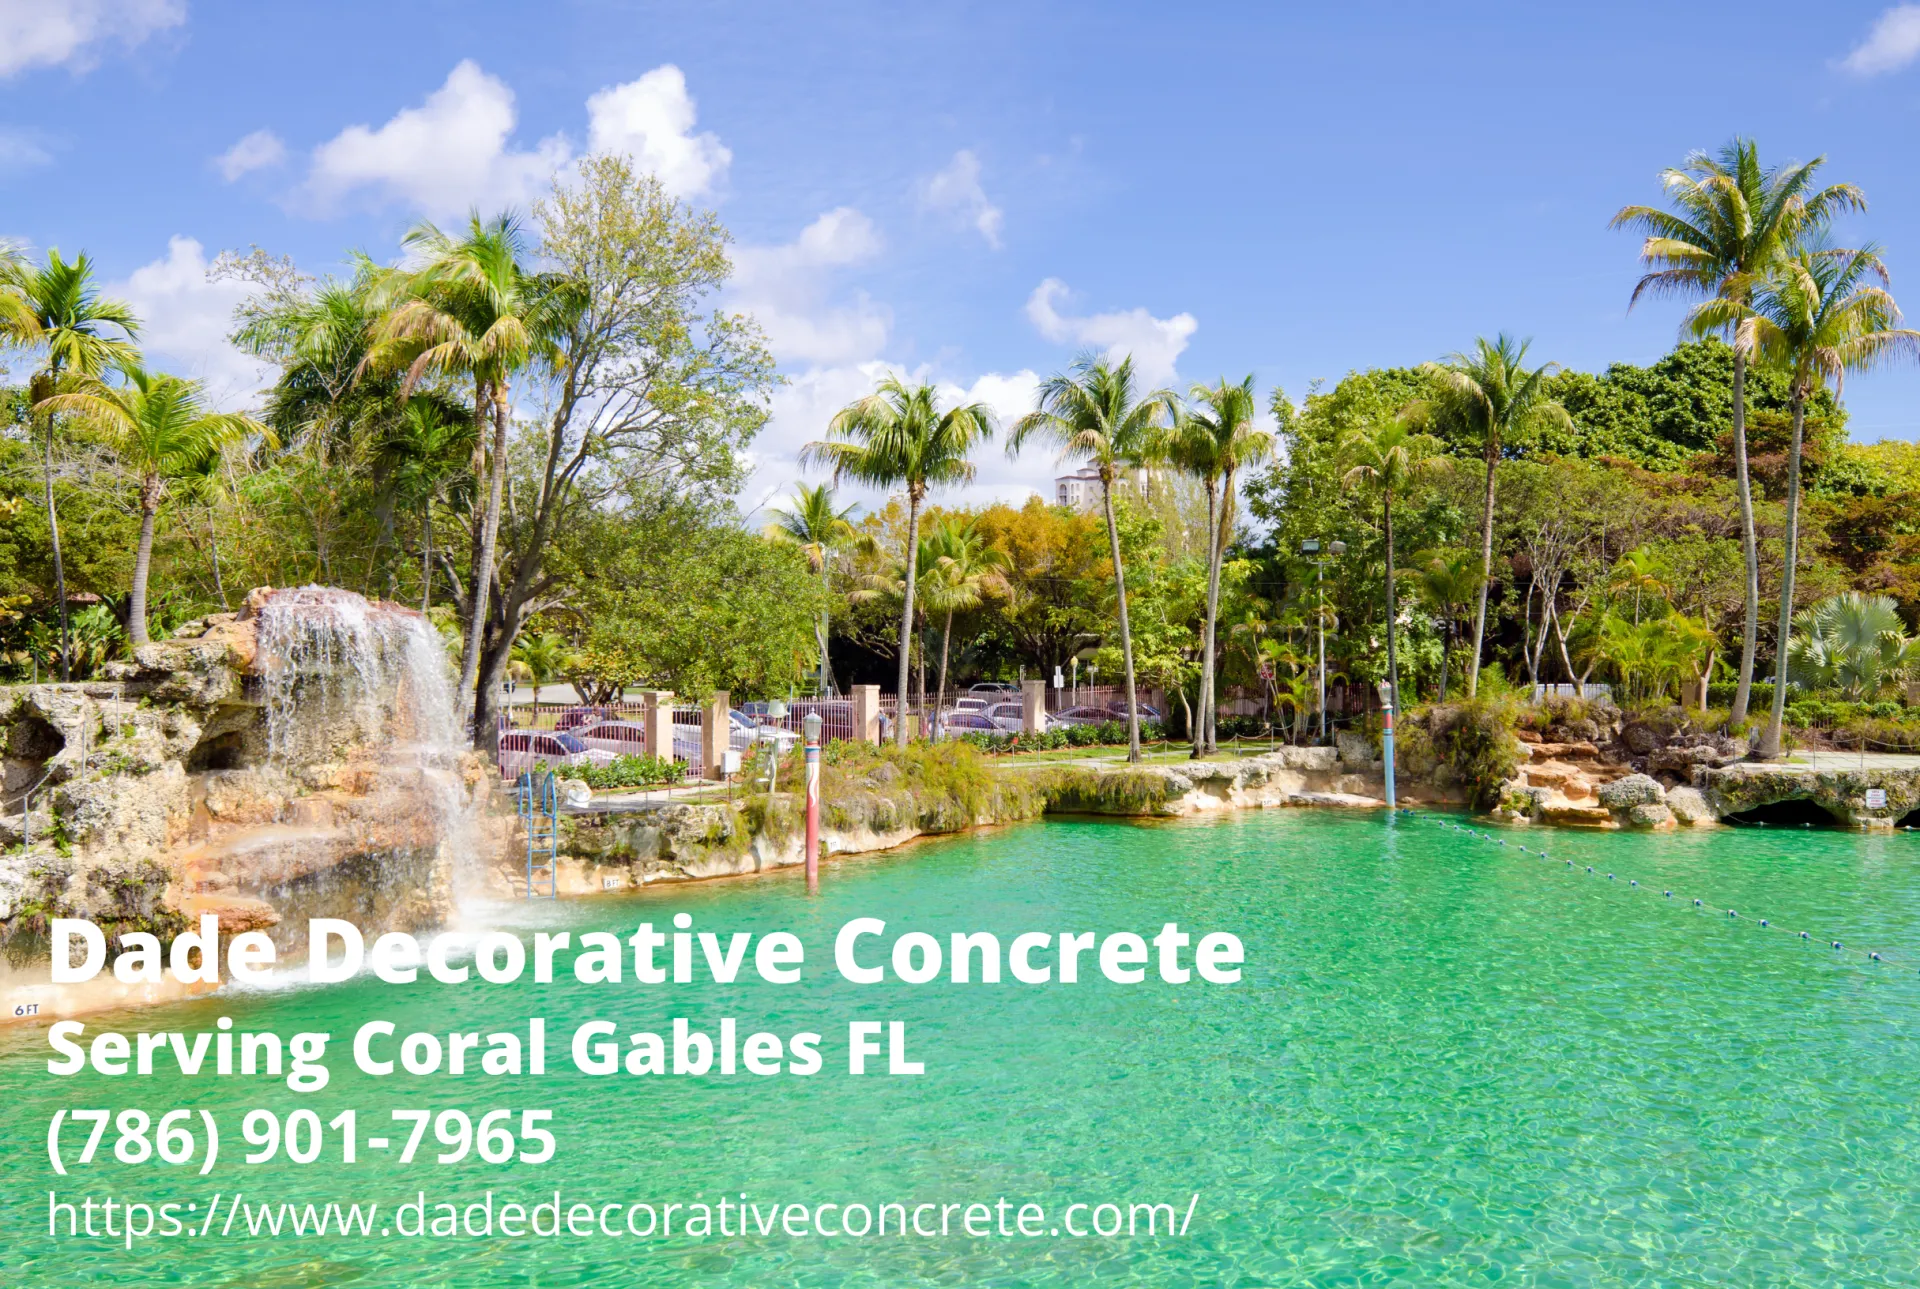 a tourist center in Coral Gables with the business info of Dade Decorative Concrete -- a decorative concrete contractor serving Coral Gables